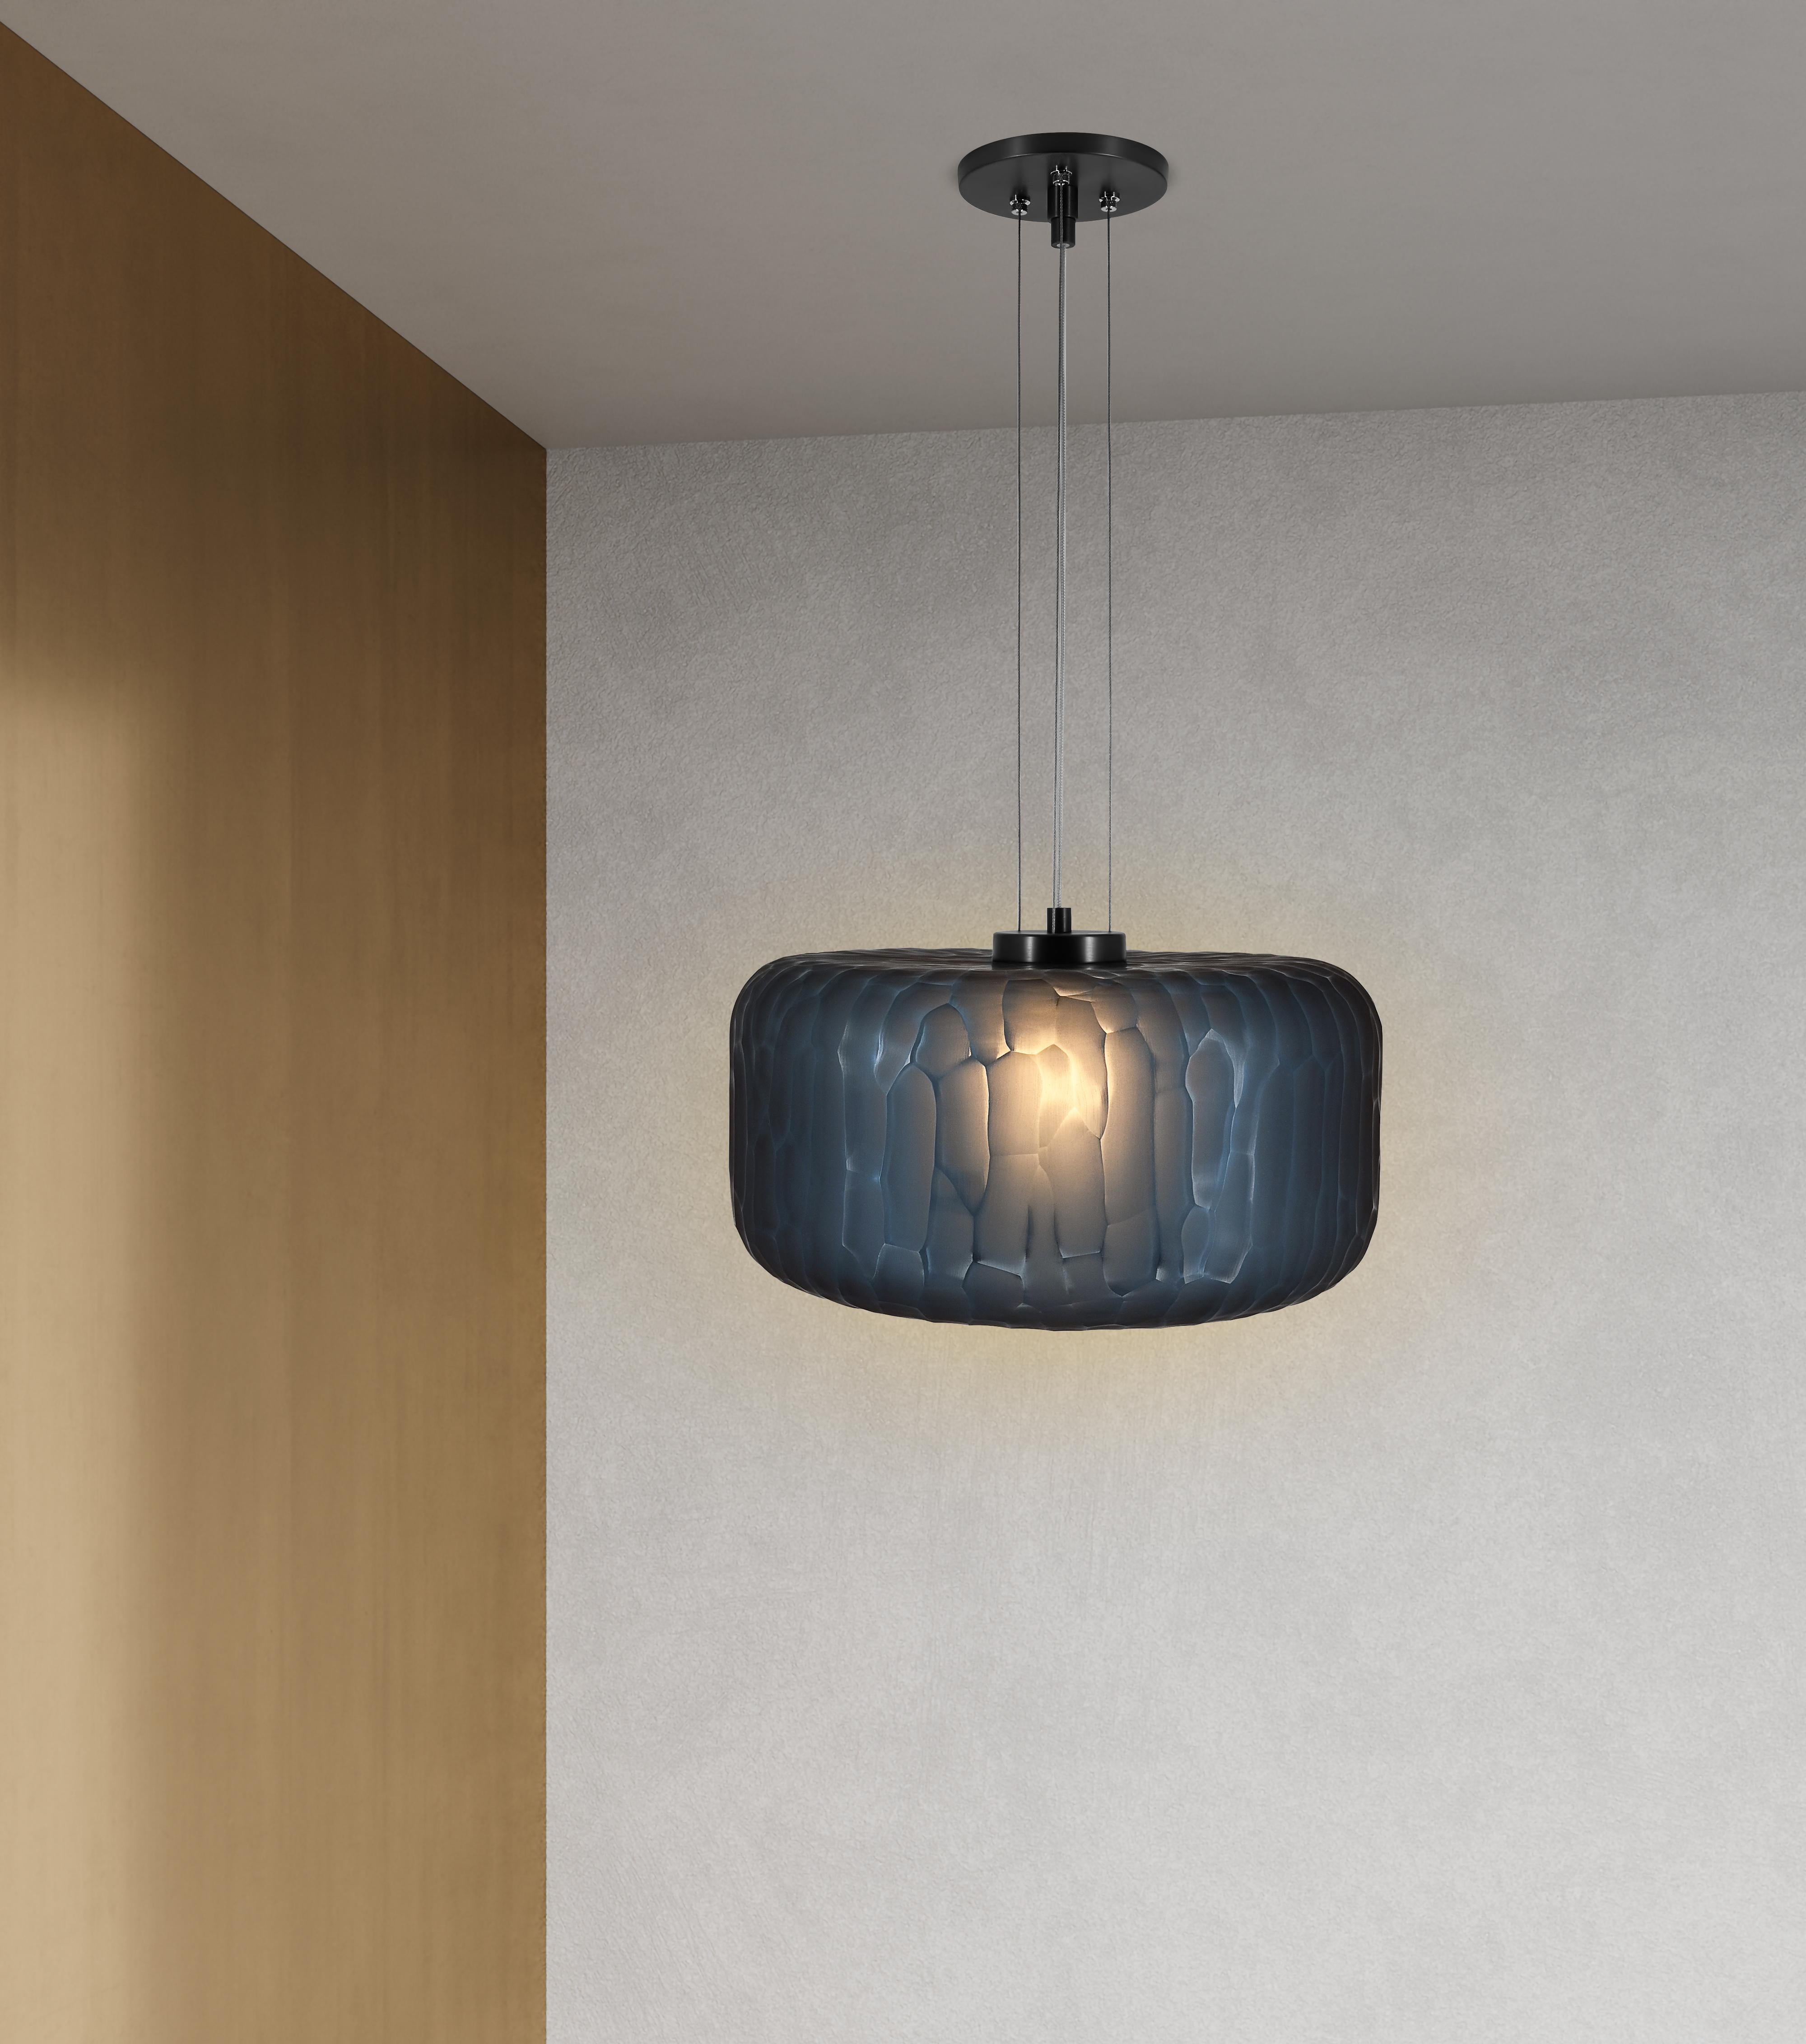 The Shereen Large pendant was designed with the expressive elegance of gemstone jewelry in mind. Bold, rounded contours with frosted, multifaceted surfaces create a remarkably exquisite sculptural piece with a rich, modern touch. Each piece is